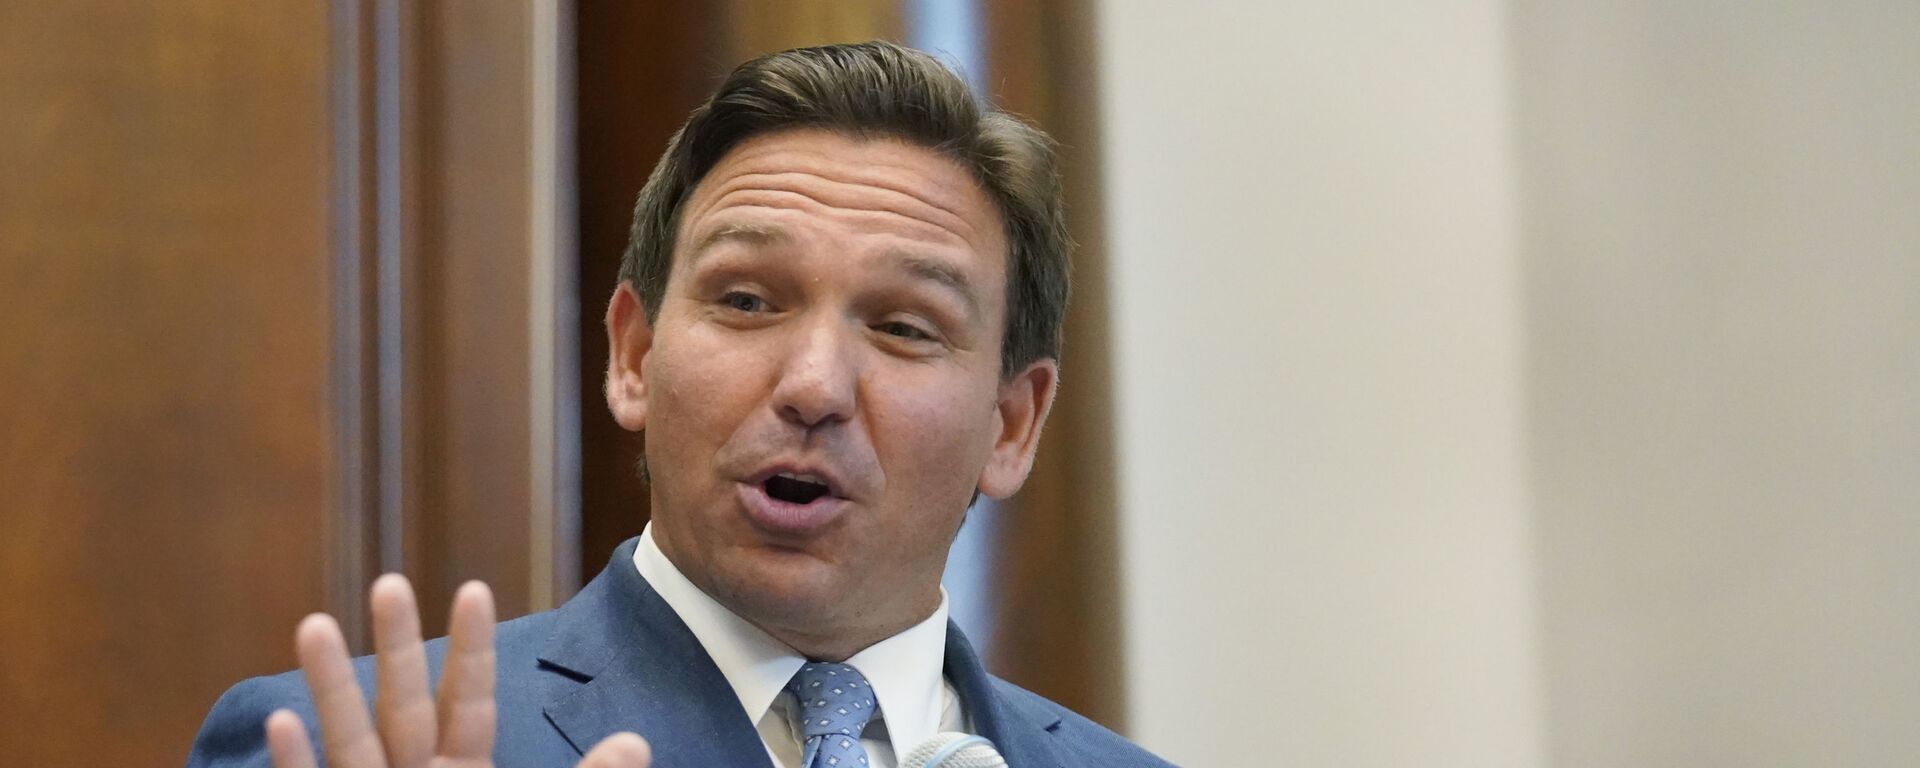 Florida Gov. Ron DeSantis gestures as he speaks, Monday, June 14, 2021, at the Shul of Bal Harbour, a Jewish community center in Surfside, Fla. DeSantis visited the South Florida temple to denounce anti-Semitism and stand with Israel, while signing a bill into law that would require public schools in his state to set aside moments of silence for children to meditate or pray - Sputnik International, 1920, 30.09.2021